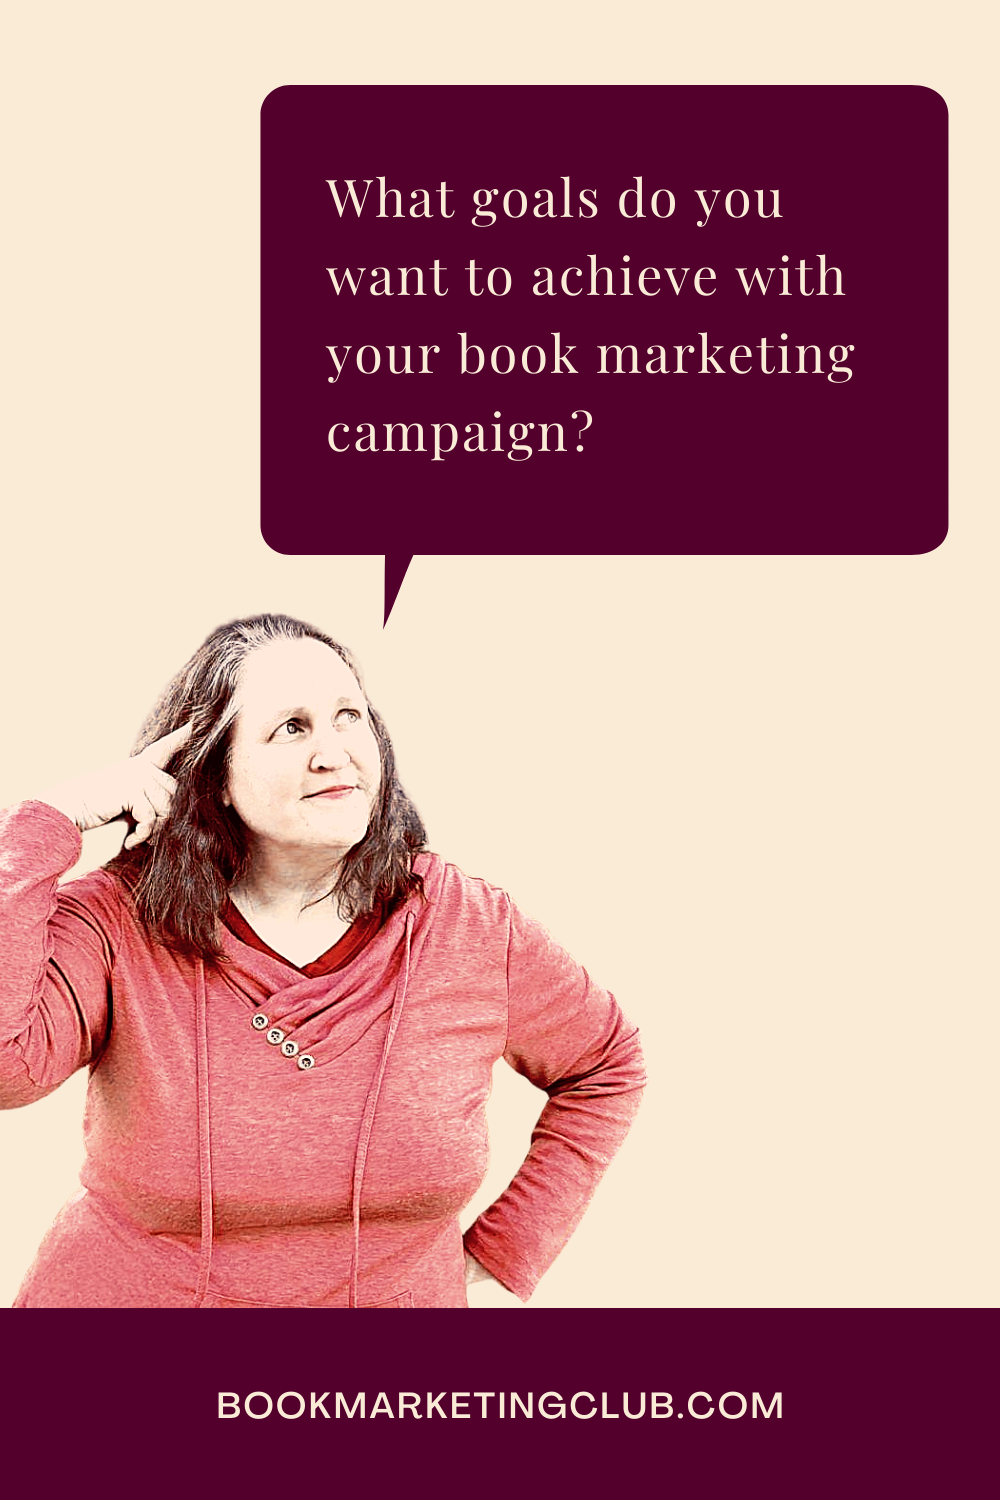 What goals do you want to achieve with your book marketing campaign